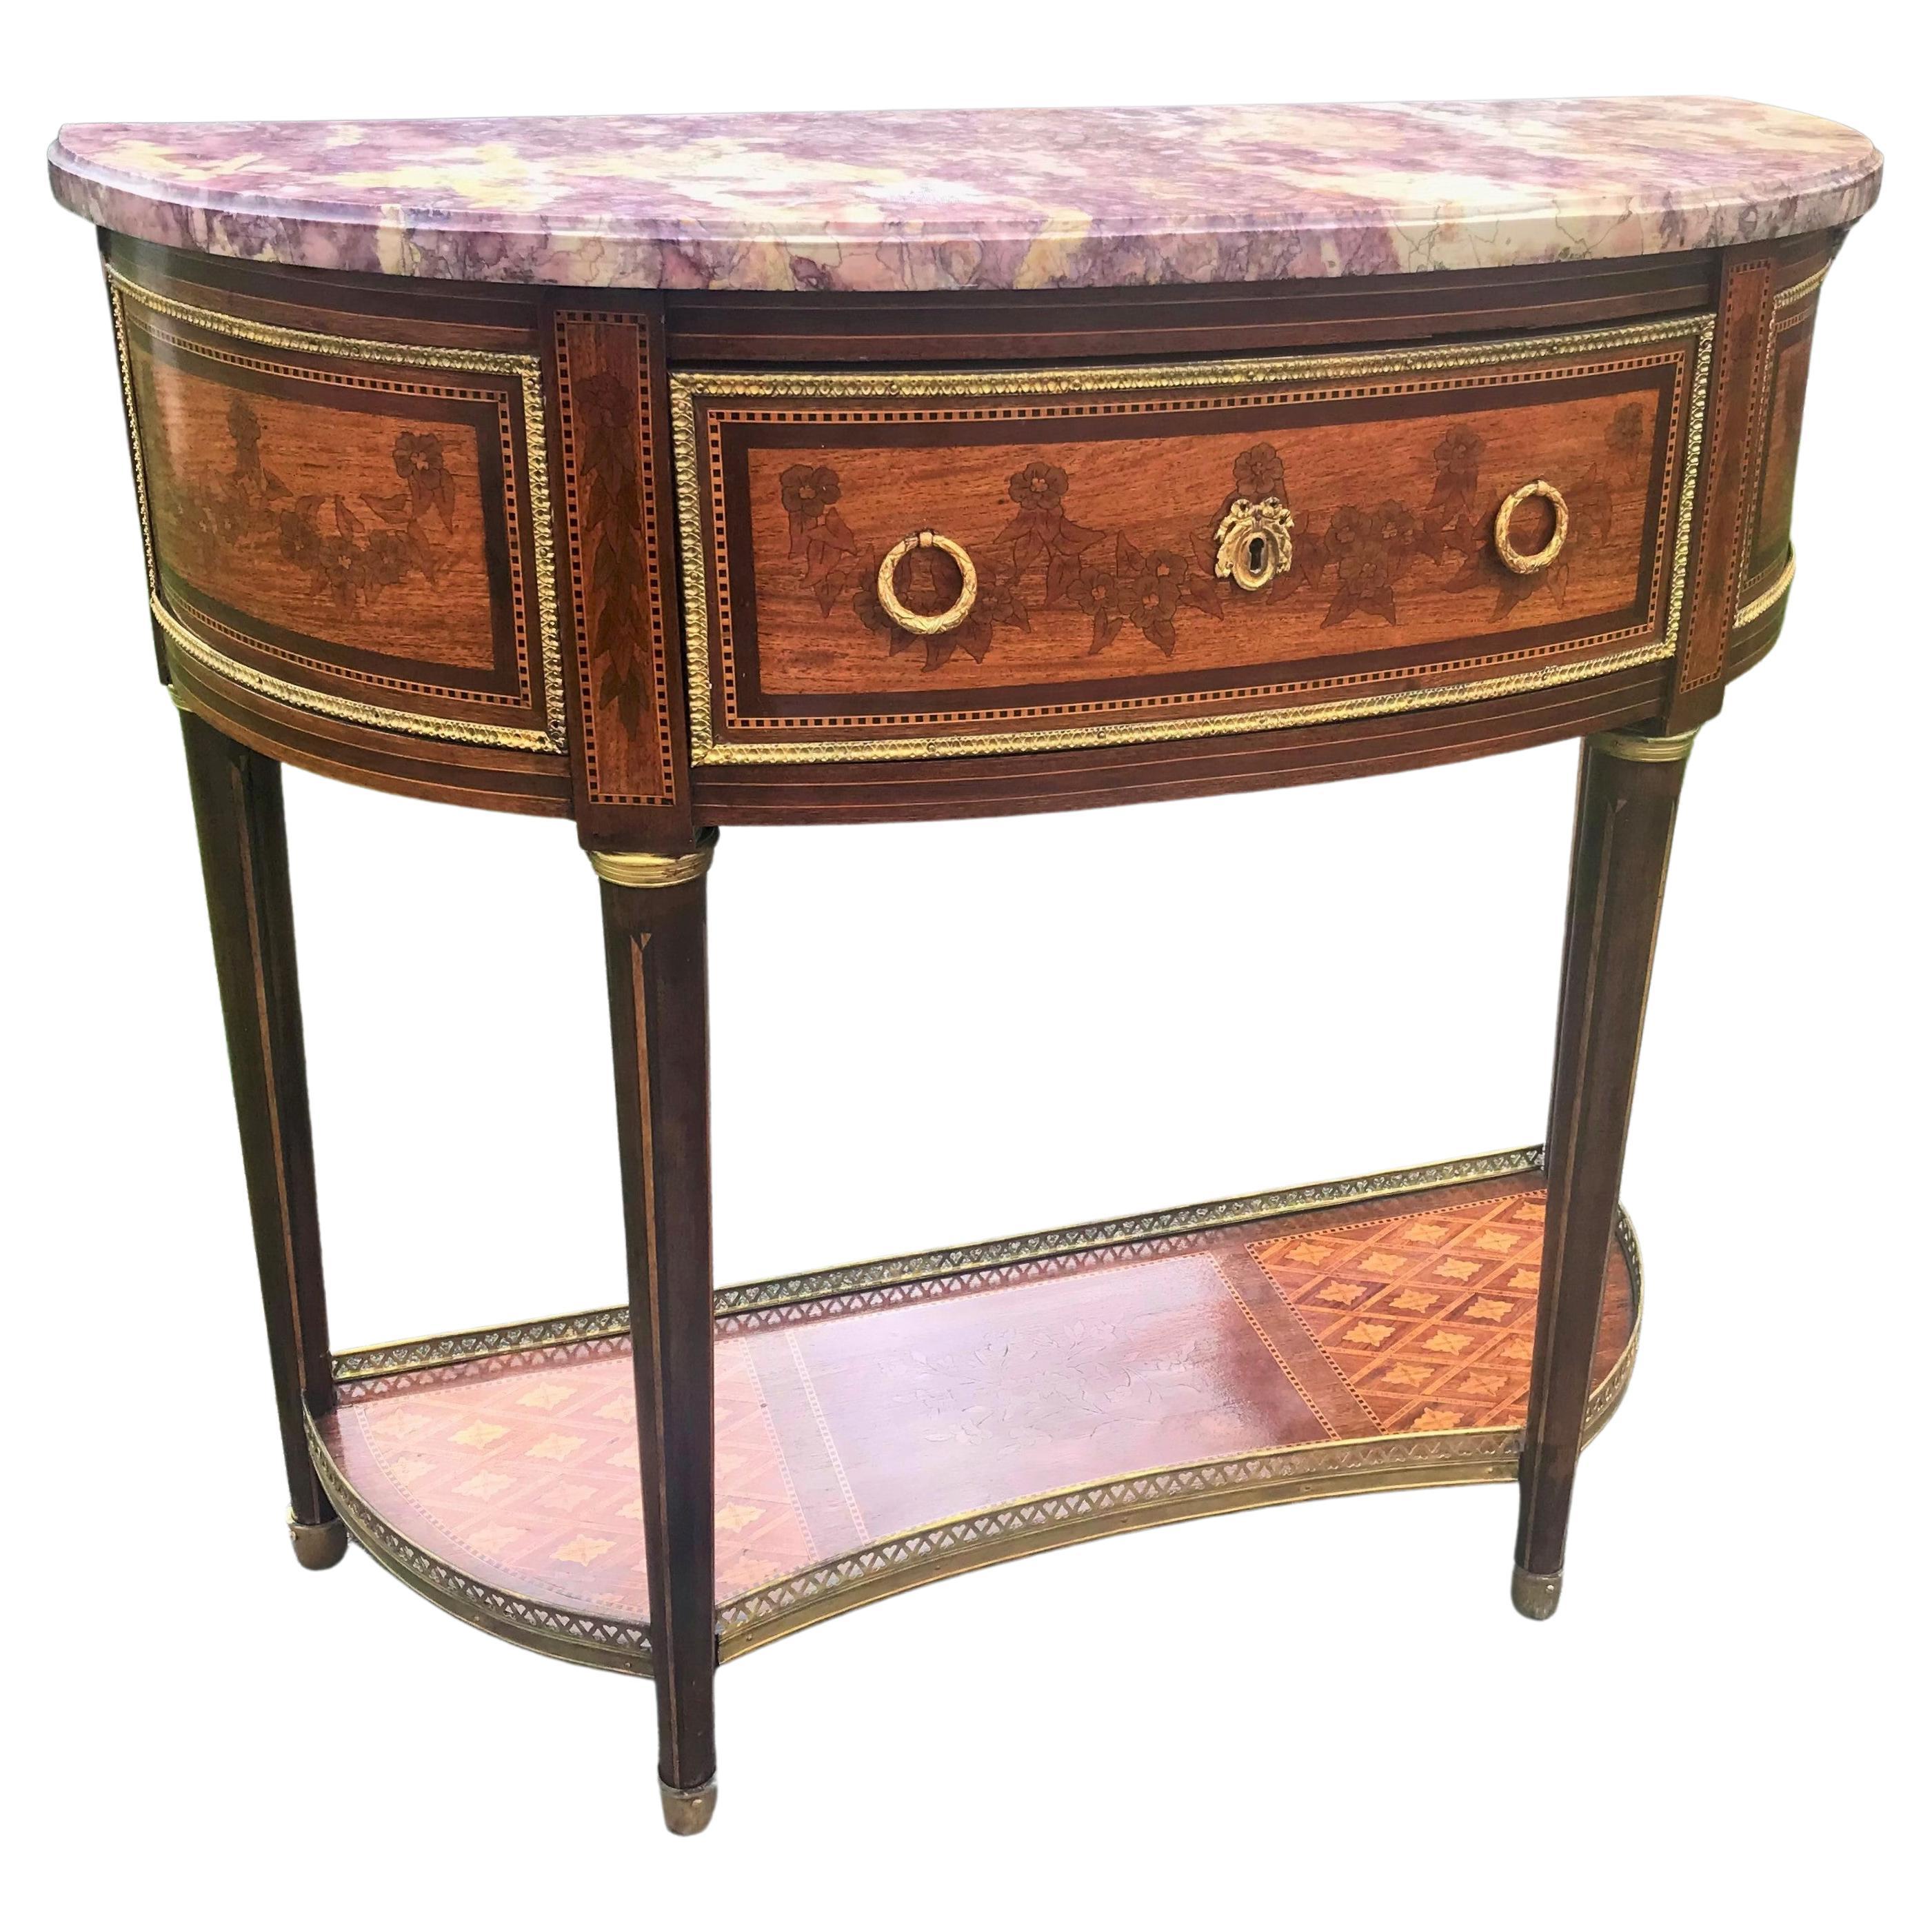 French Louis XVI Style Inlaid Demilune Console Desserte Table with Marble Top